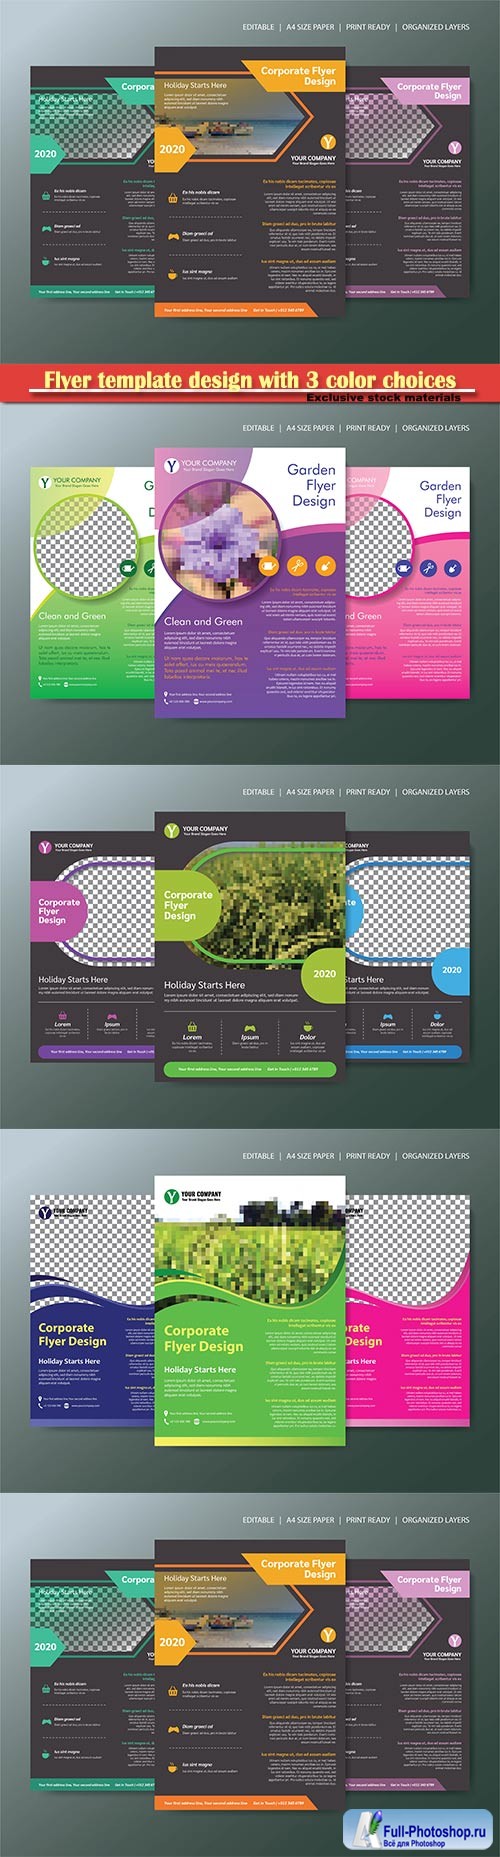 Flyer template design with 3 color choices, organized layer